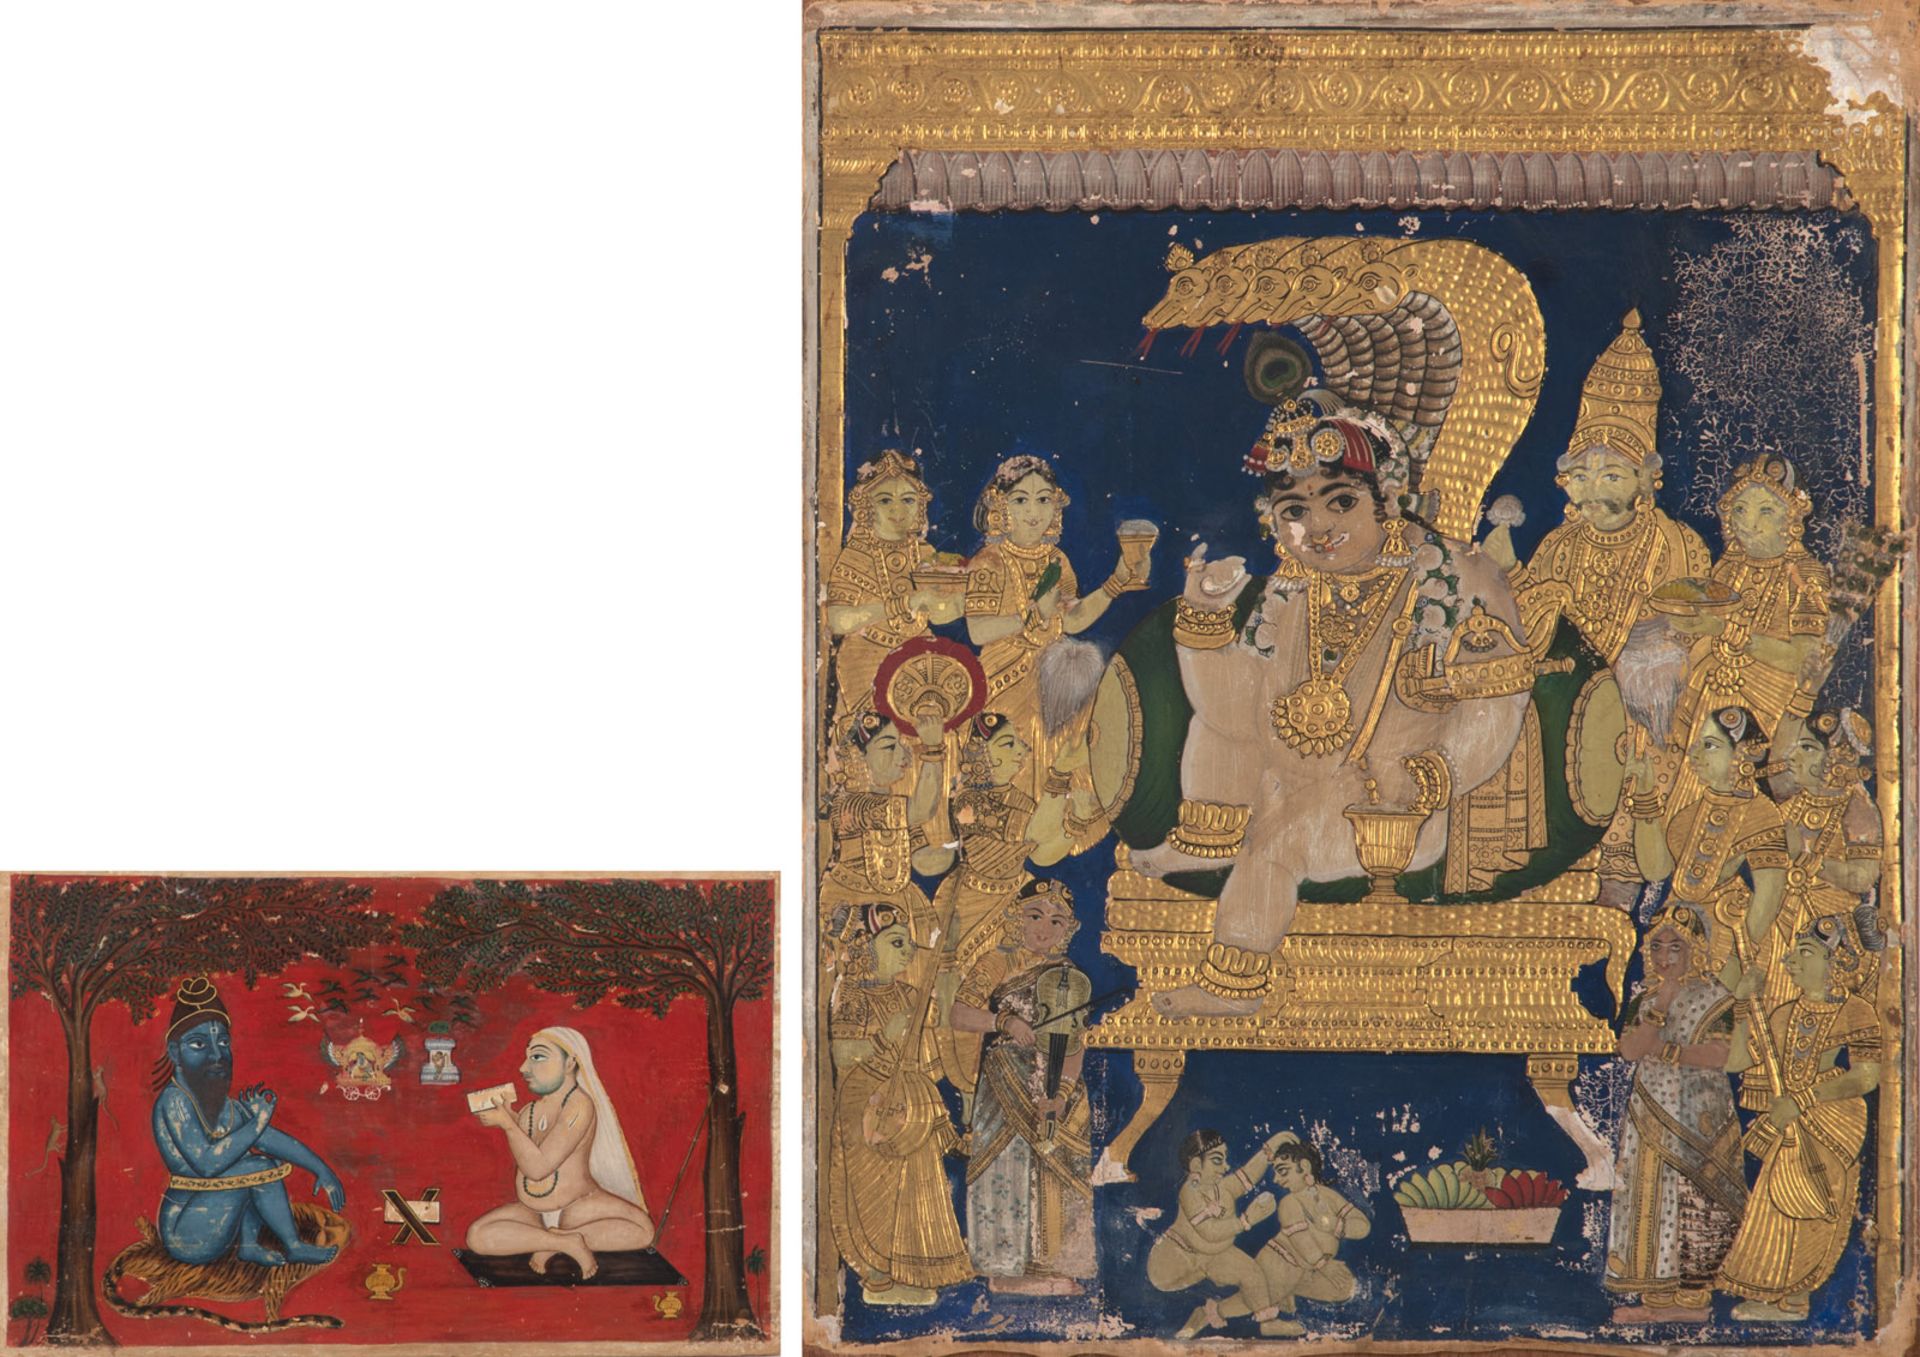 TWO POLYCHROME PAINTINGS ON WOOD DEPICTING KRISHNA AND LAKSHMI